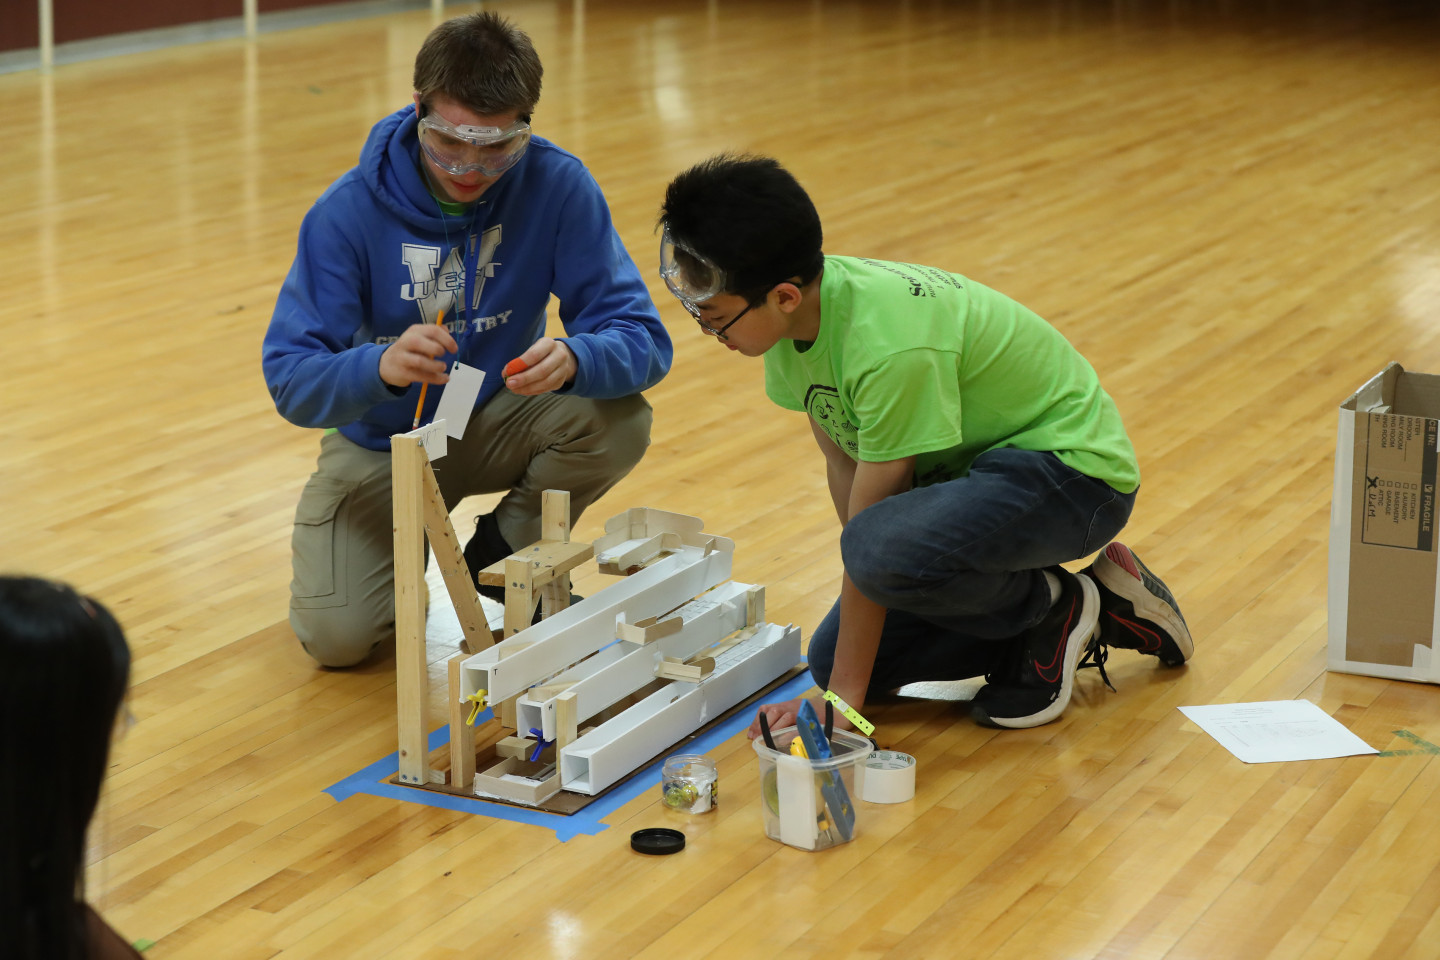 A ܽƵ student assists a participant in the Regional Science Olympiad event held at ܽƵ.